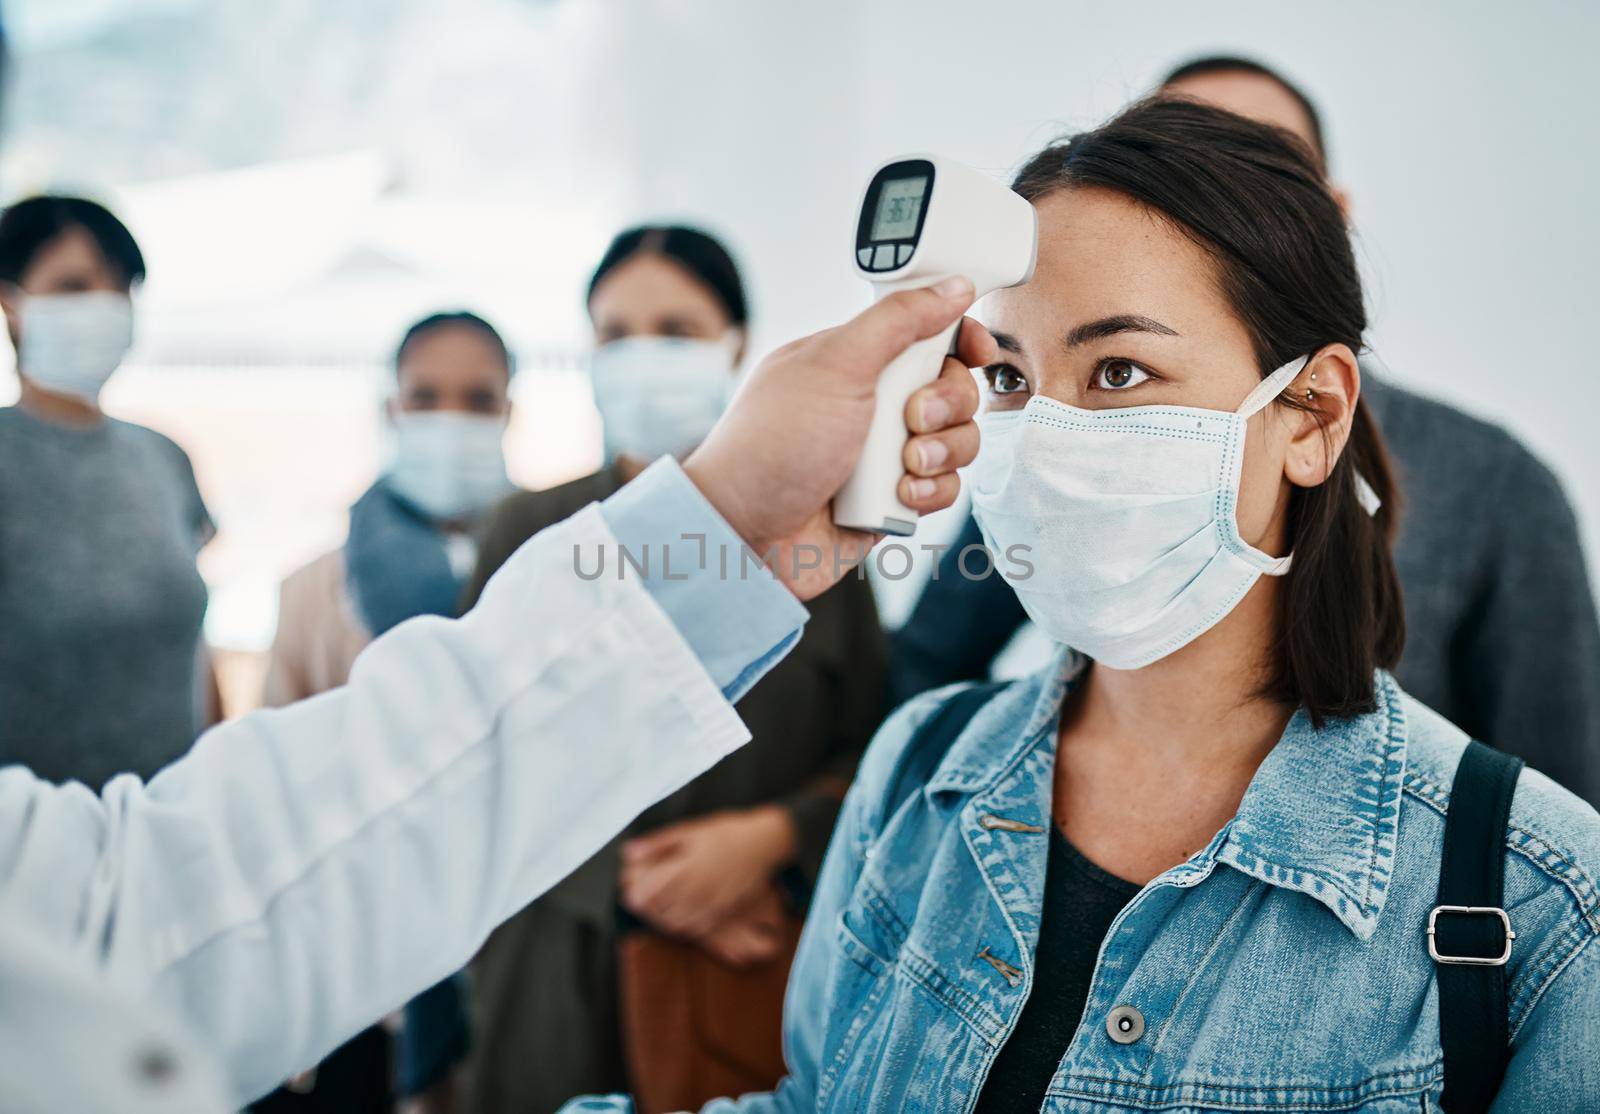 Covid screening with a female tourist in a mask having her temperature taken with an infrared thermometer while waiting to board in an airport. Travel restrictions during the corona virus pandemic.